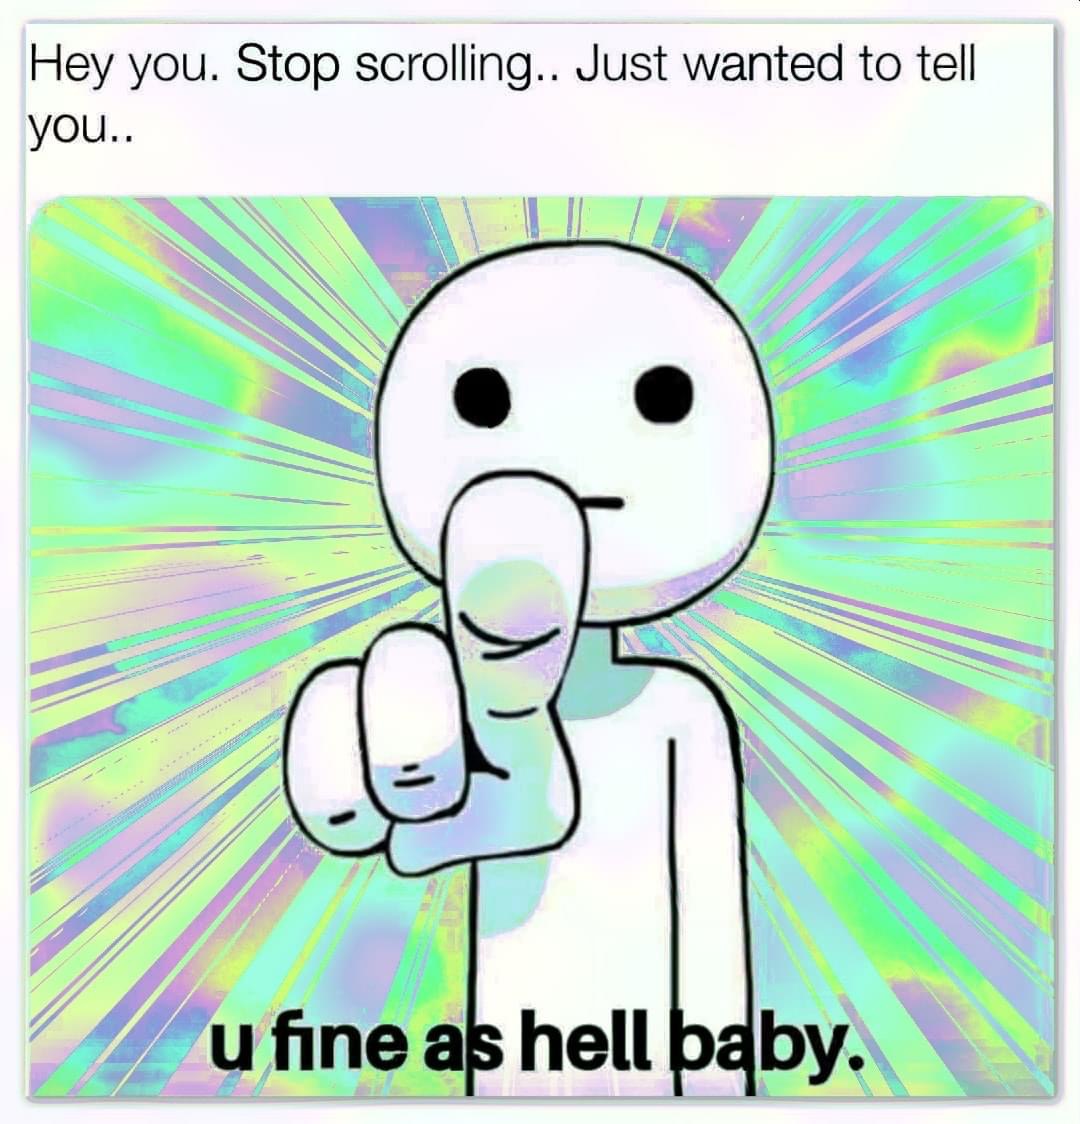 u fine as hell baby - Hey you. Stop scrolling.. Just wanted to tell you.. u fine as hell baby.